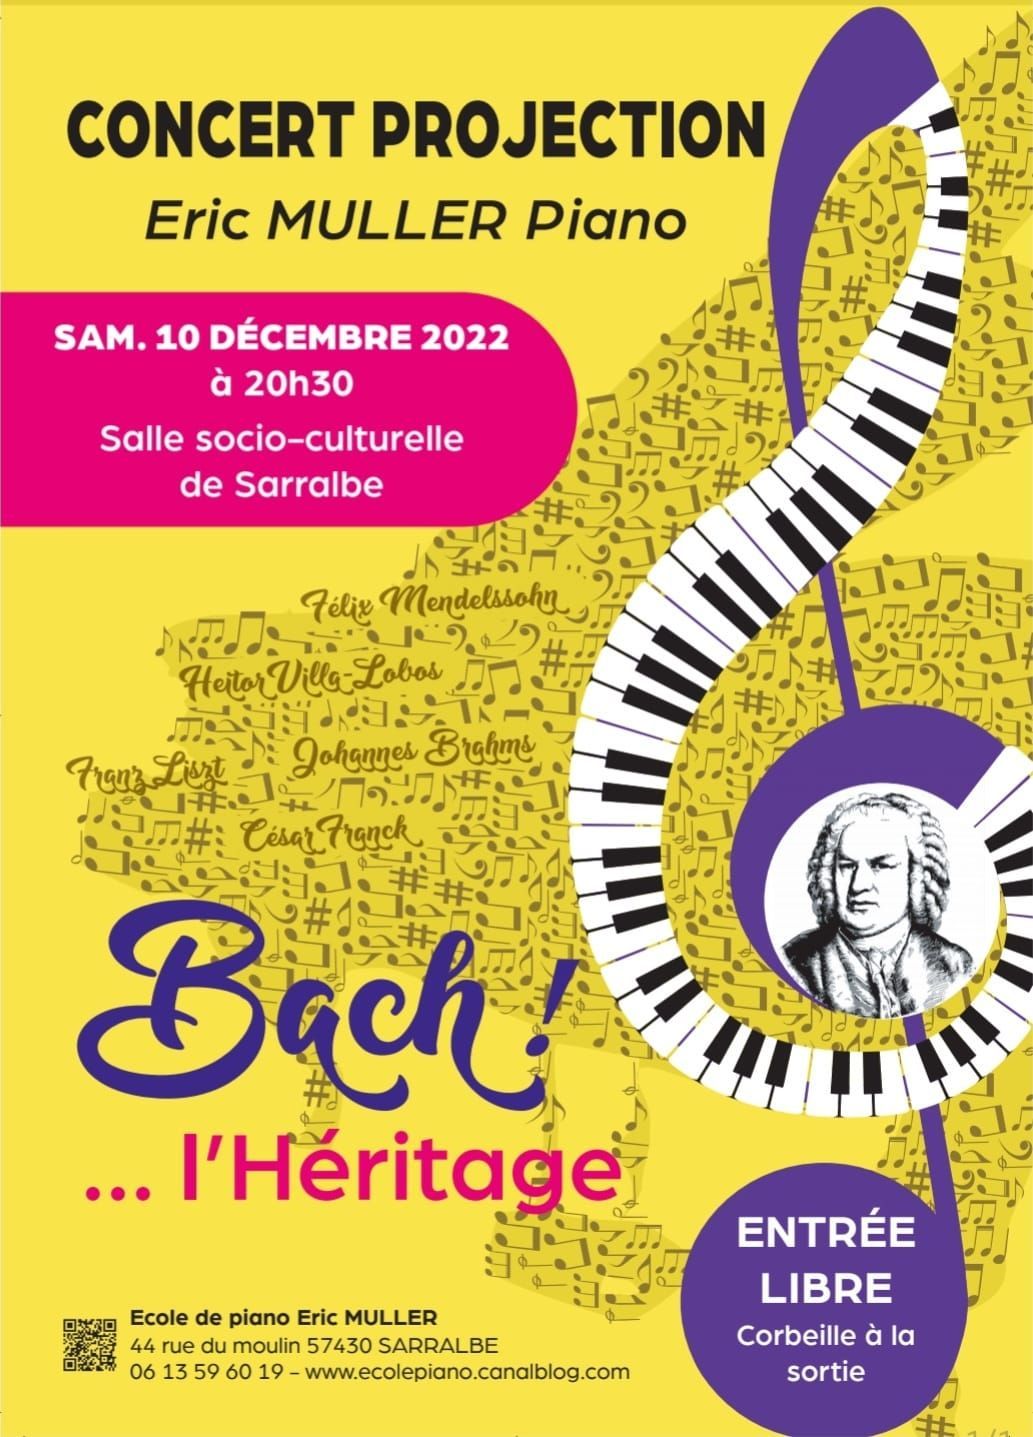 Concert Projection - Eric Muller Piano